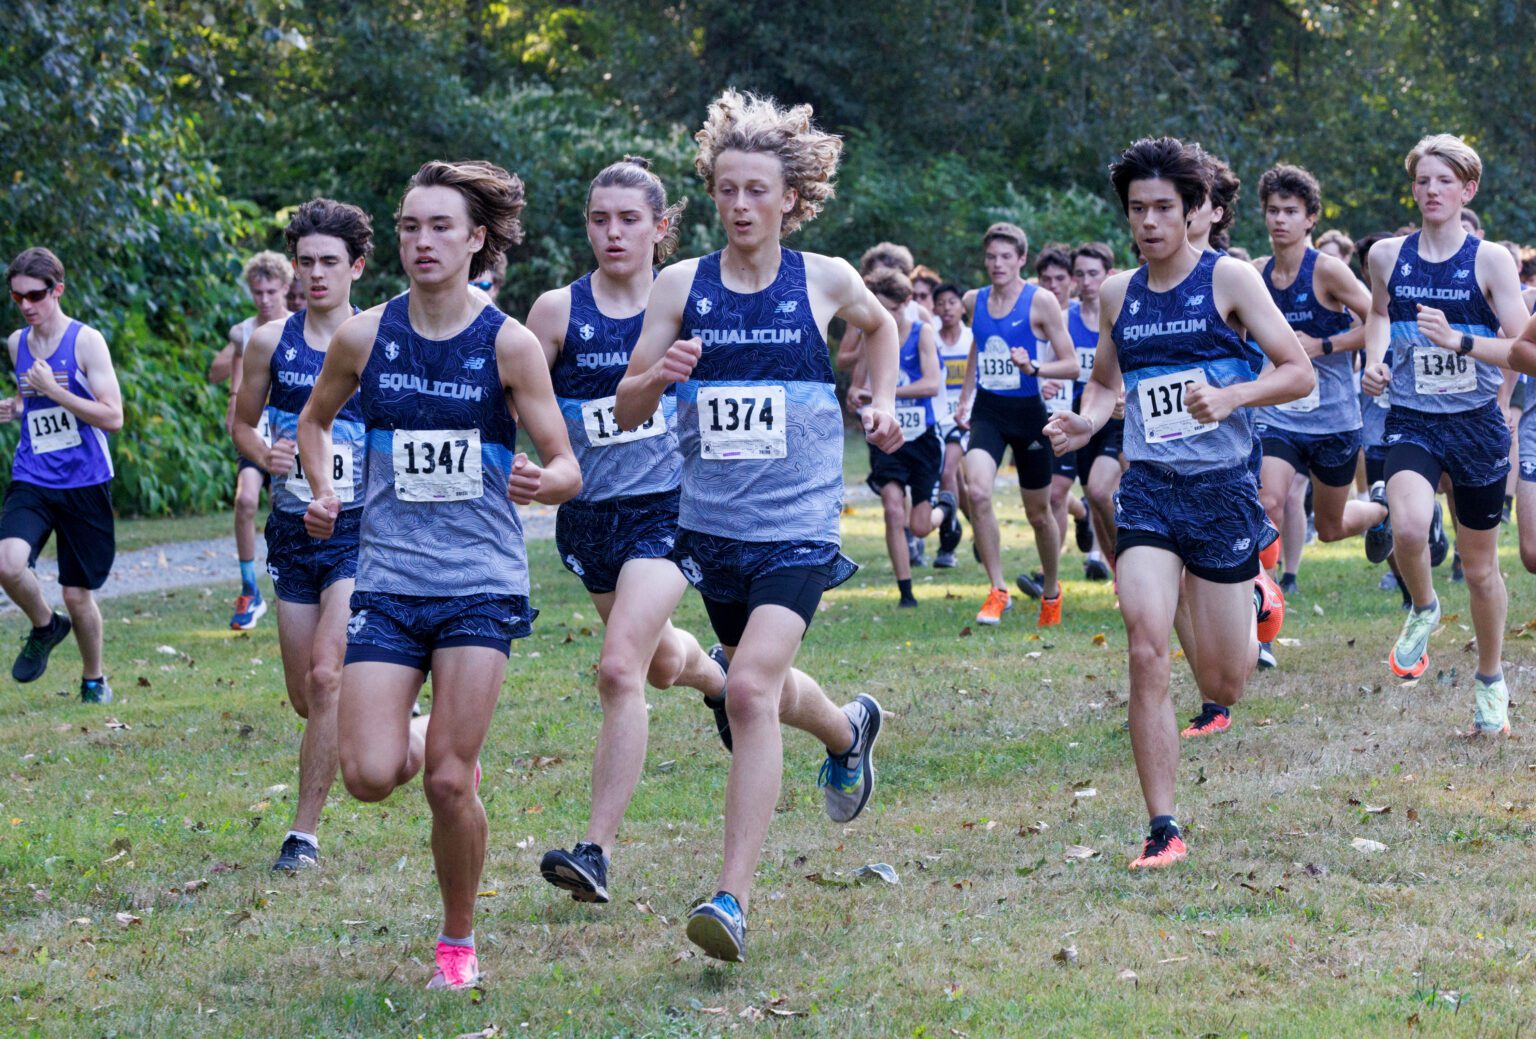 Owen Voight (1374) and the Squalicum boys cross country team takes the lead in their race against Sedro-Woolley and Ferndale at Hovander Homestead Park on Sept. 14.